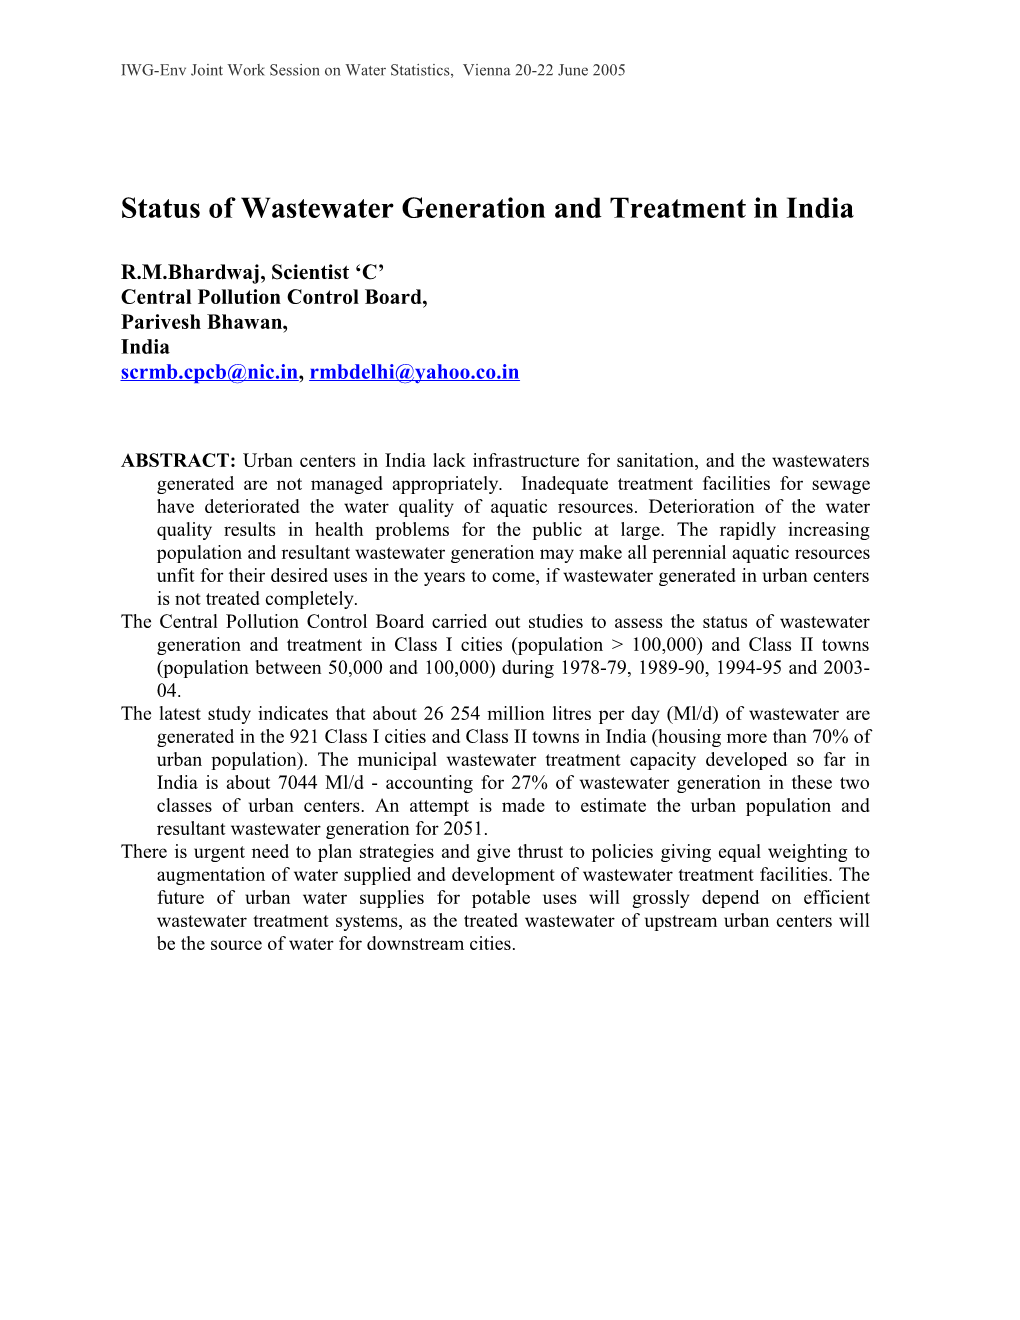 Status of Wastewater Generation and Treatment in India